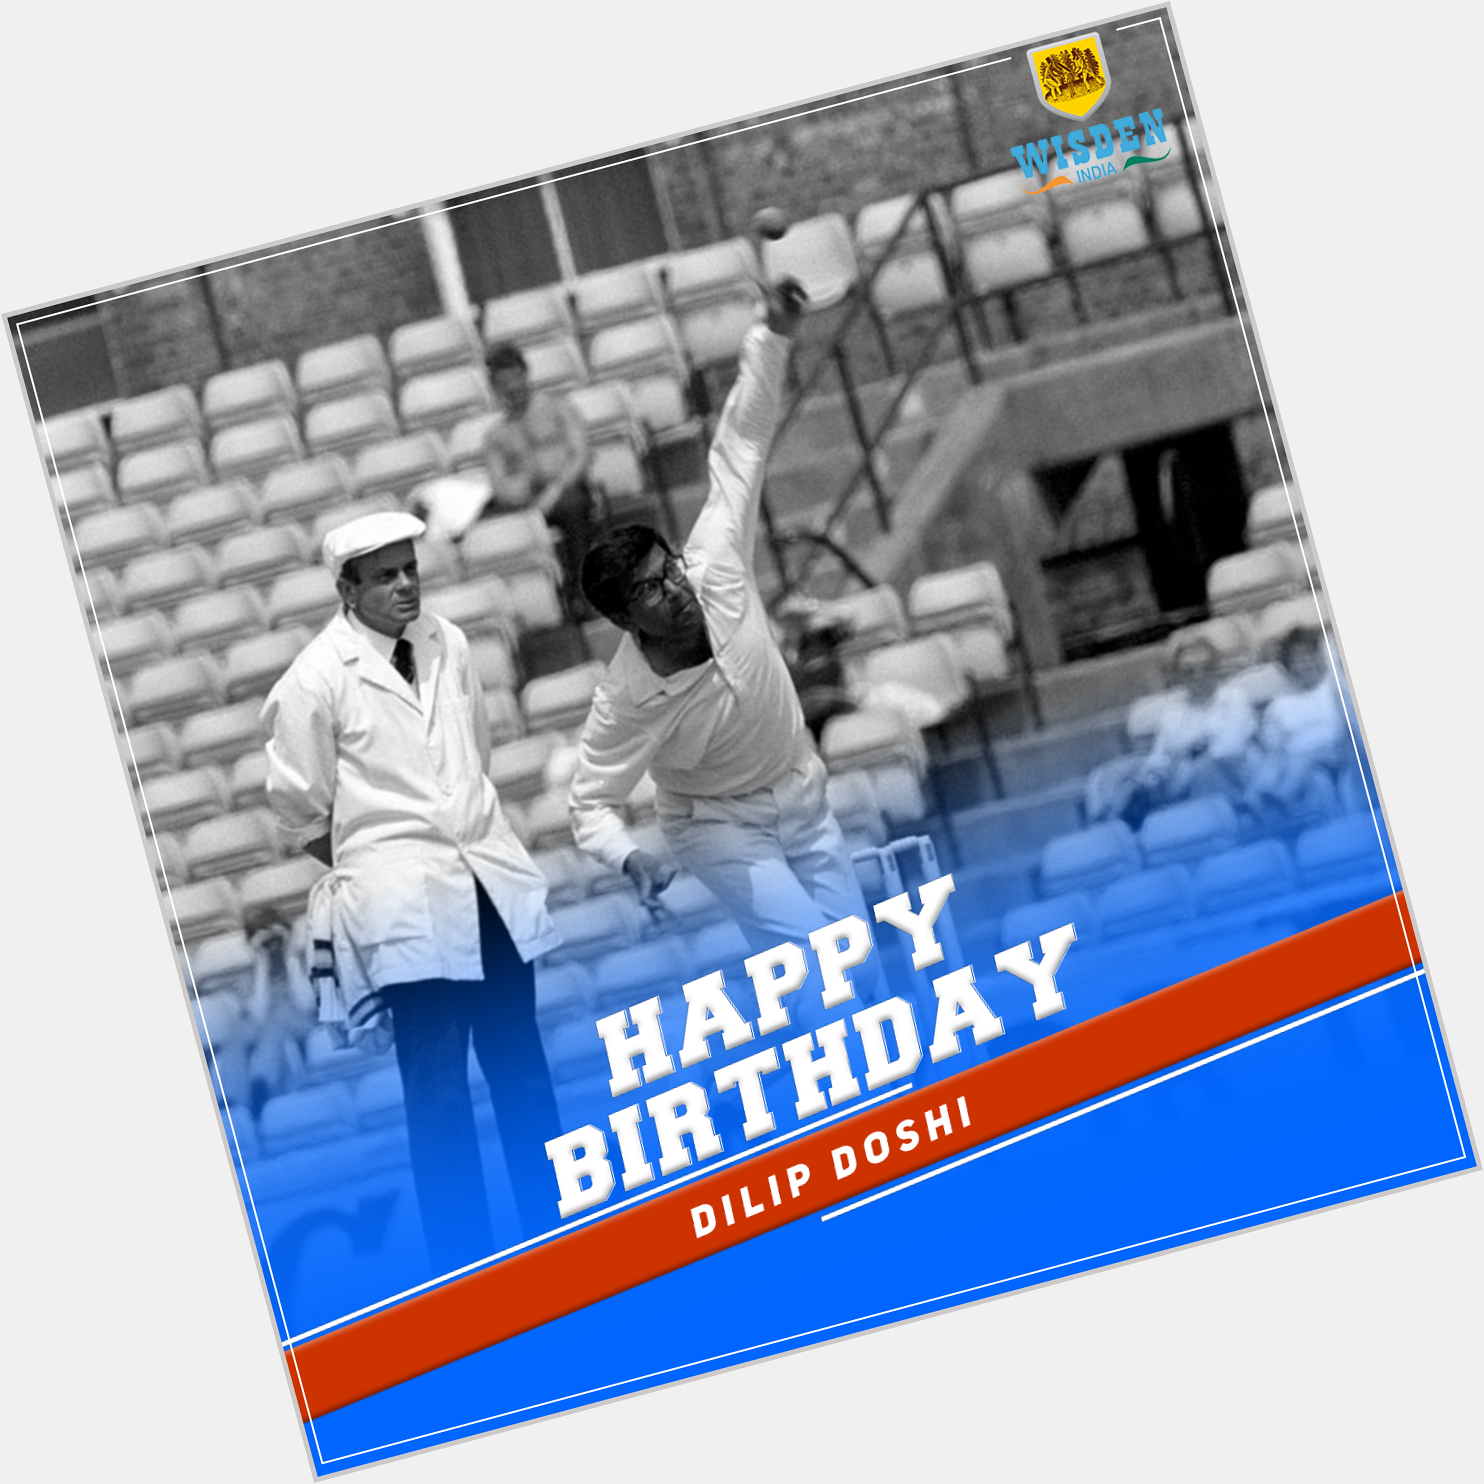 Wishing a very Happy Birthday to former Indian spinner Dilip Doshi! 